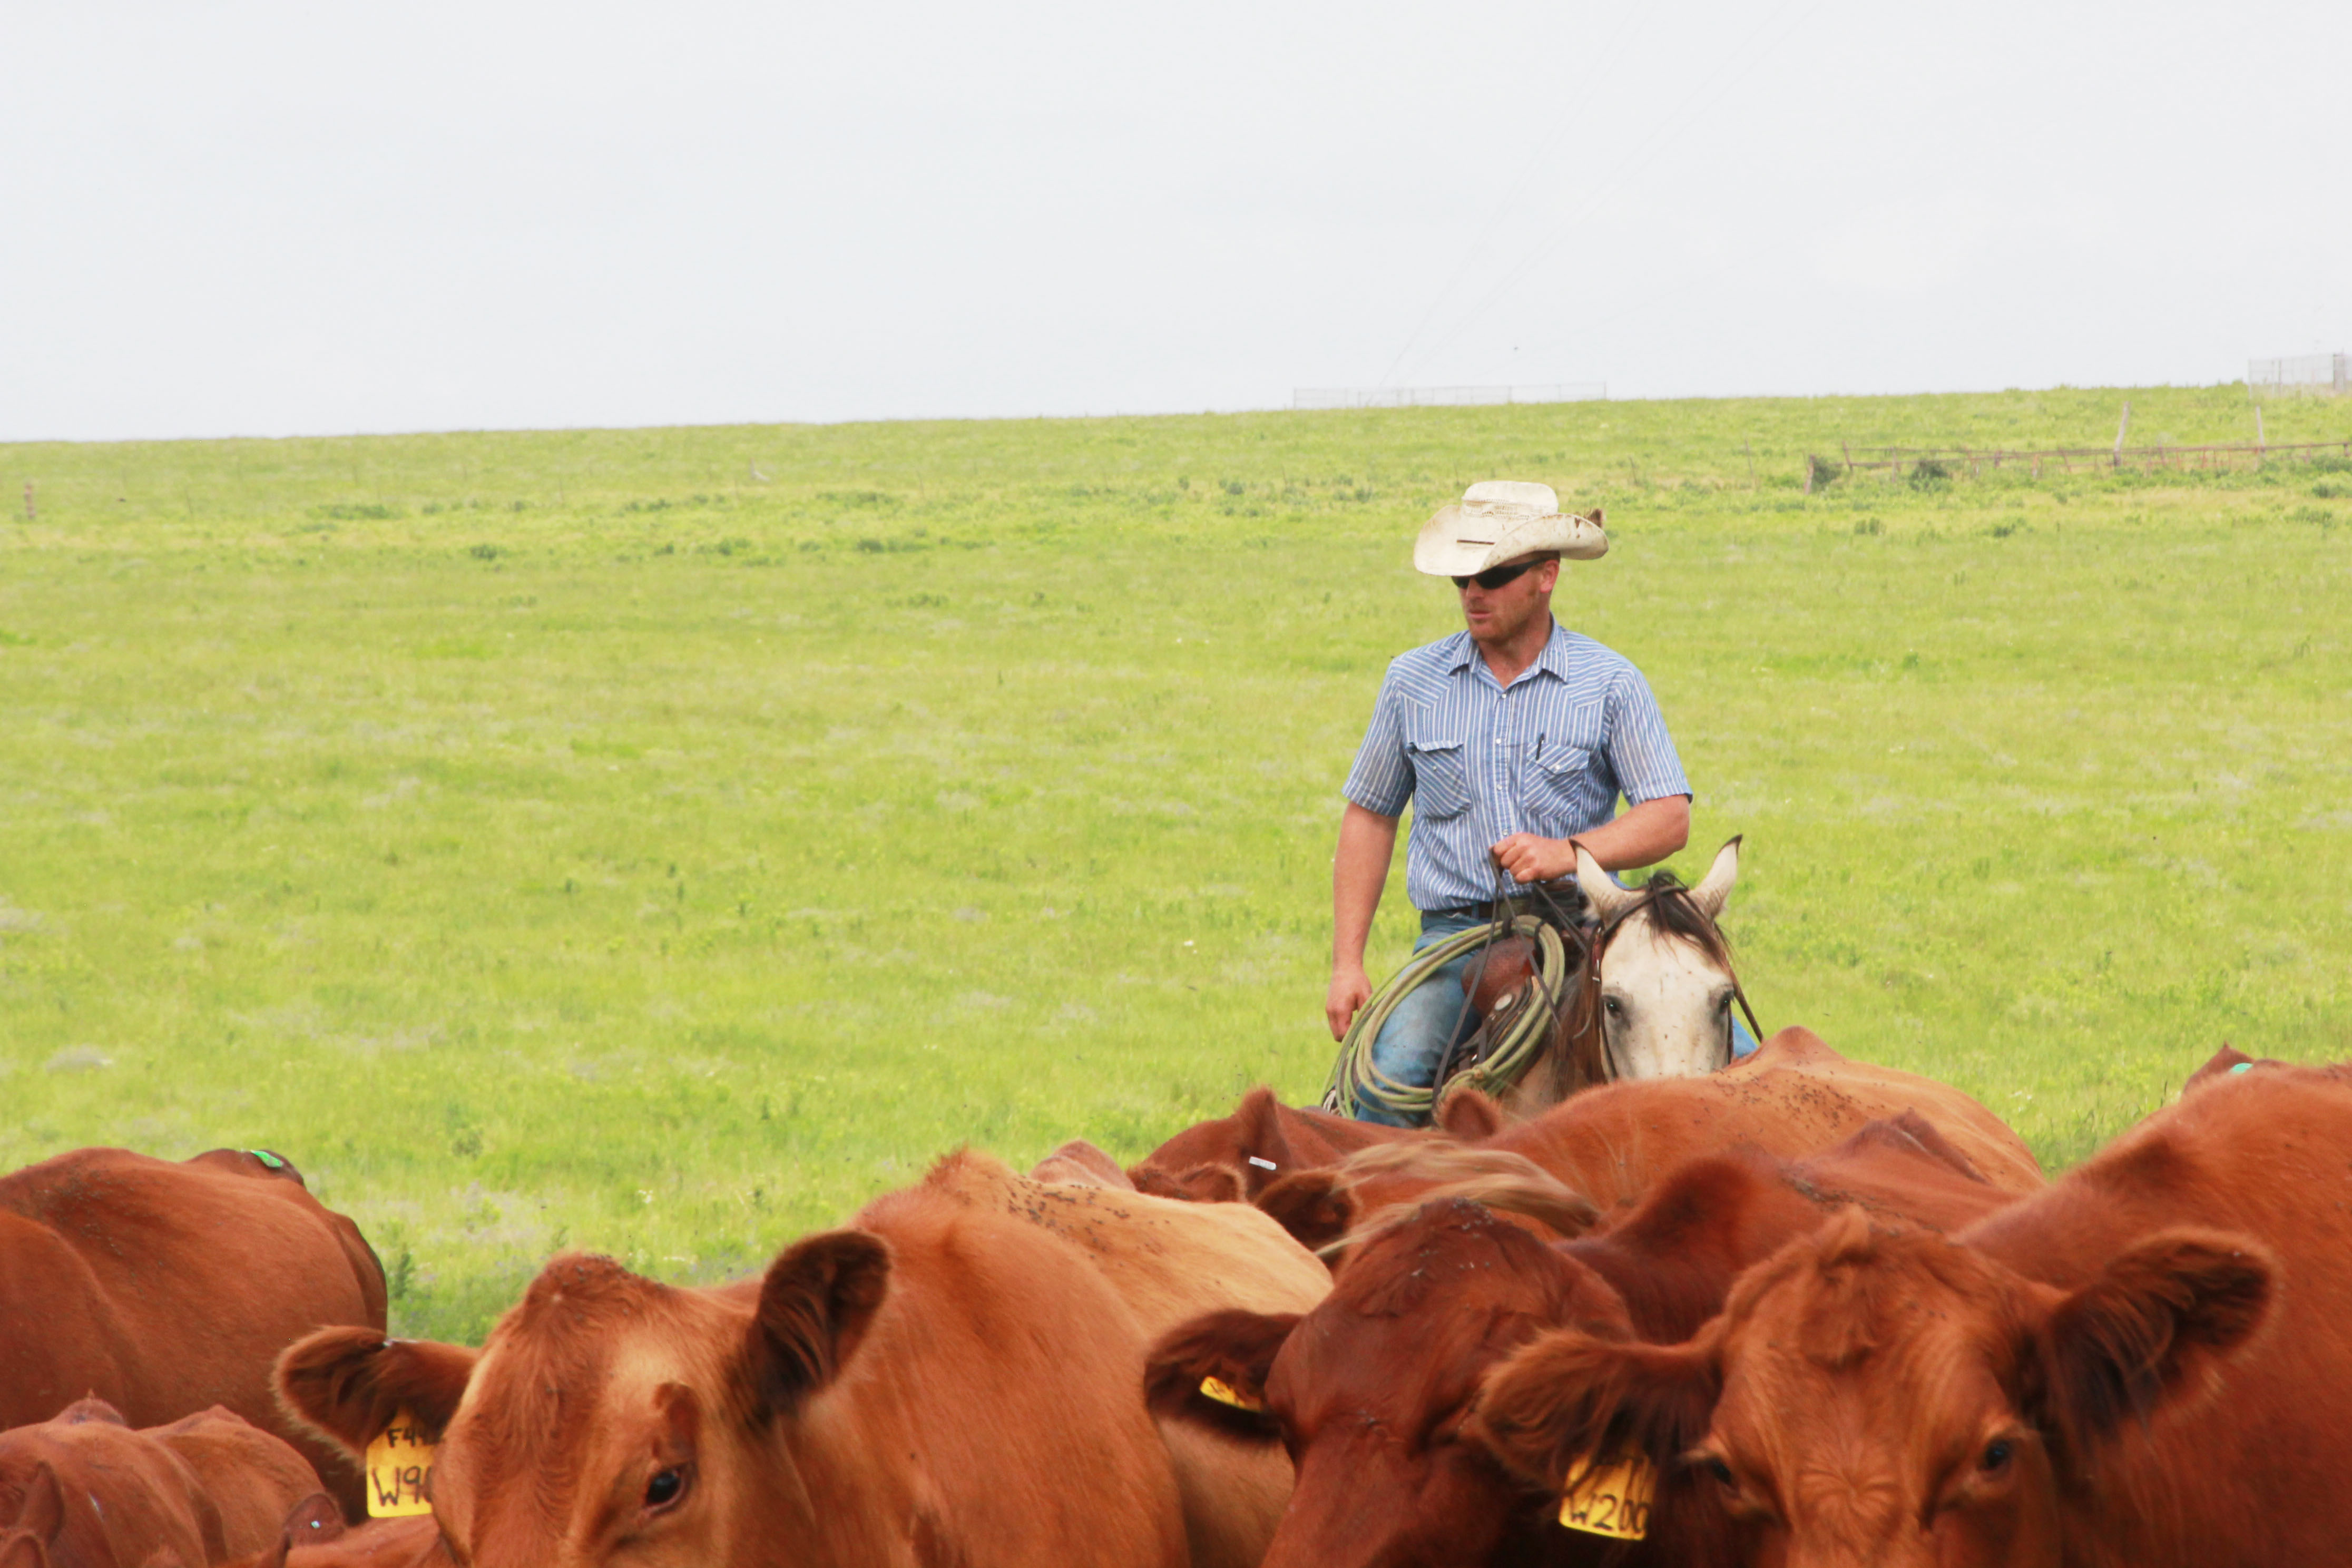 Woods County OSU Extension Center Invites Producers to Attend Beef Cattle Conference Oct. 12th